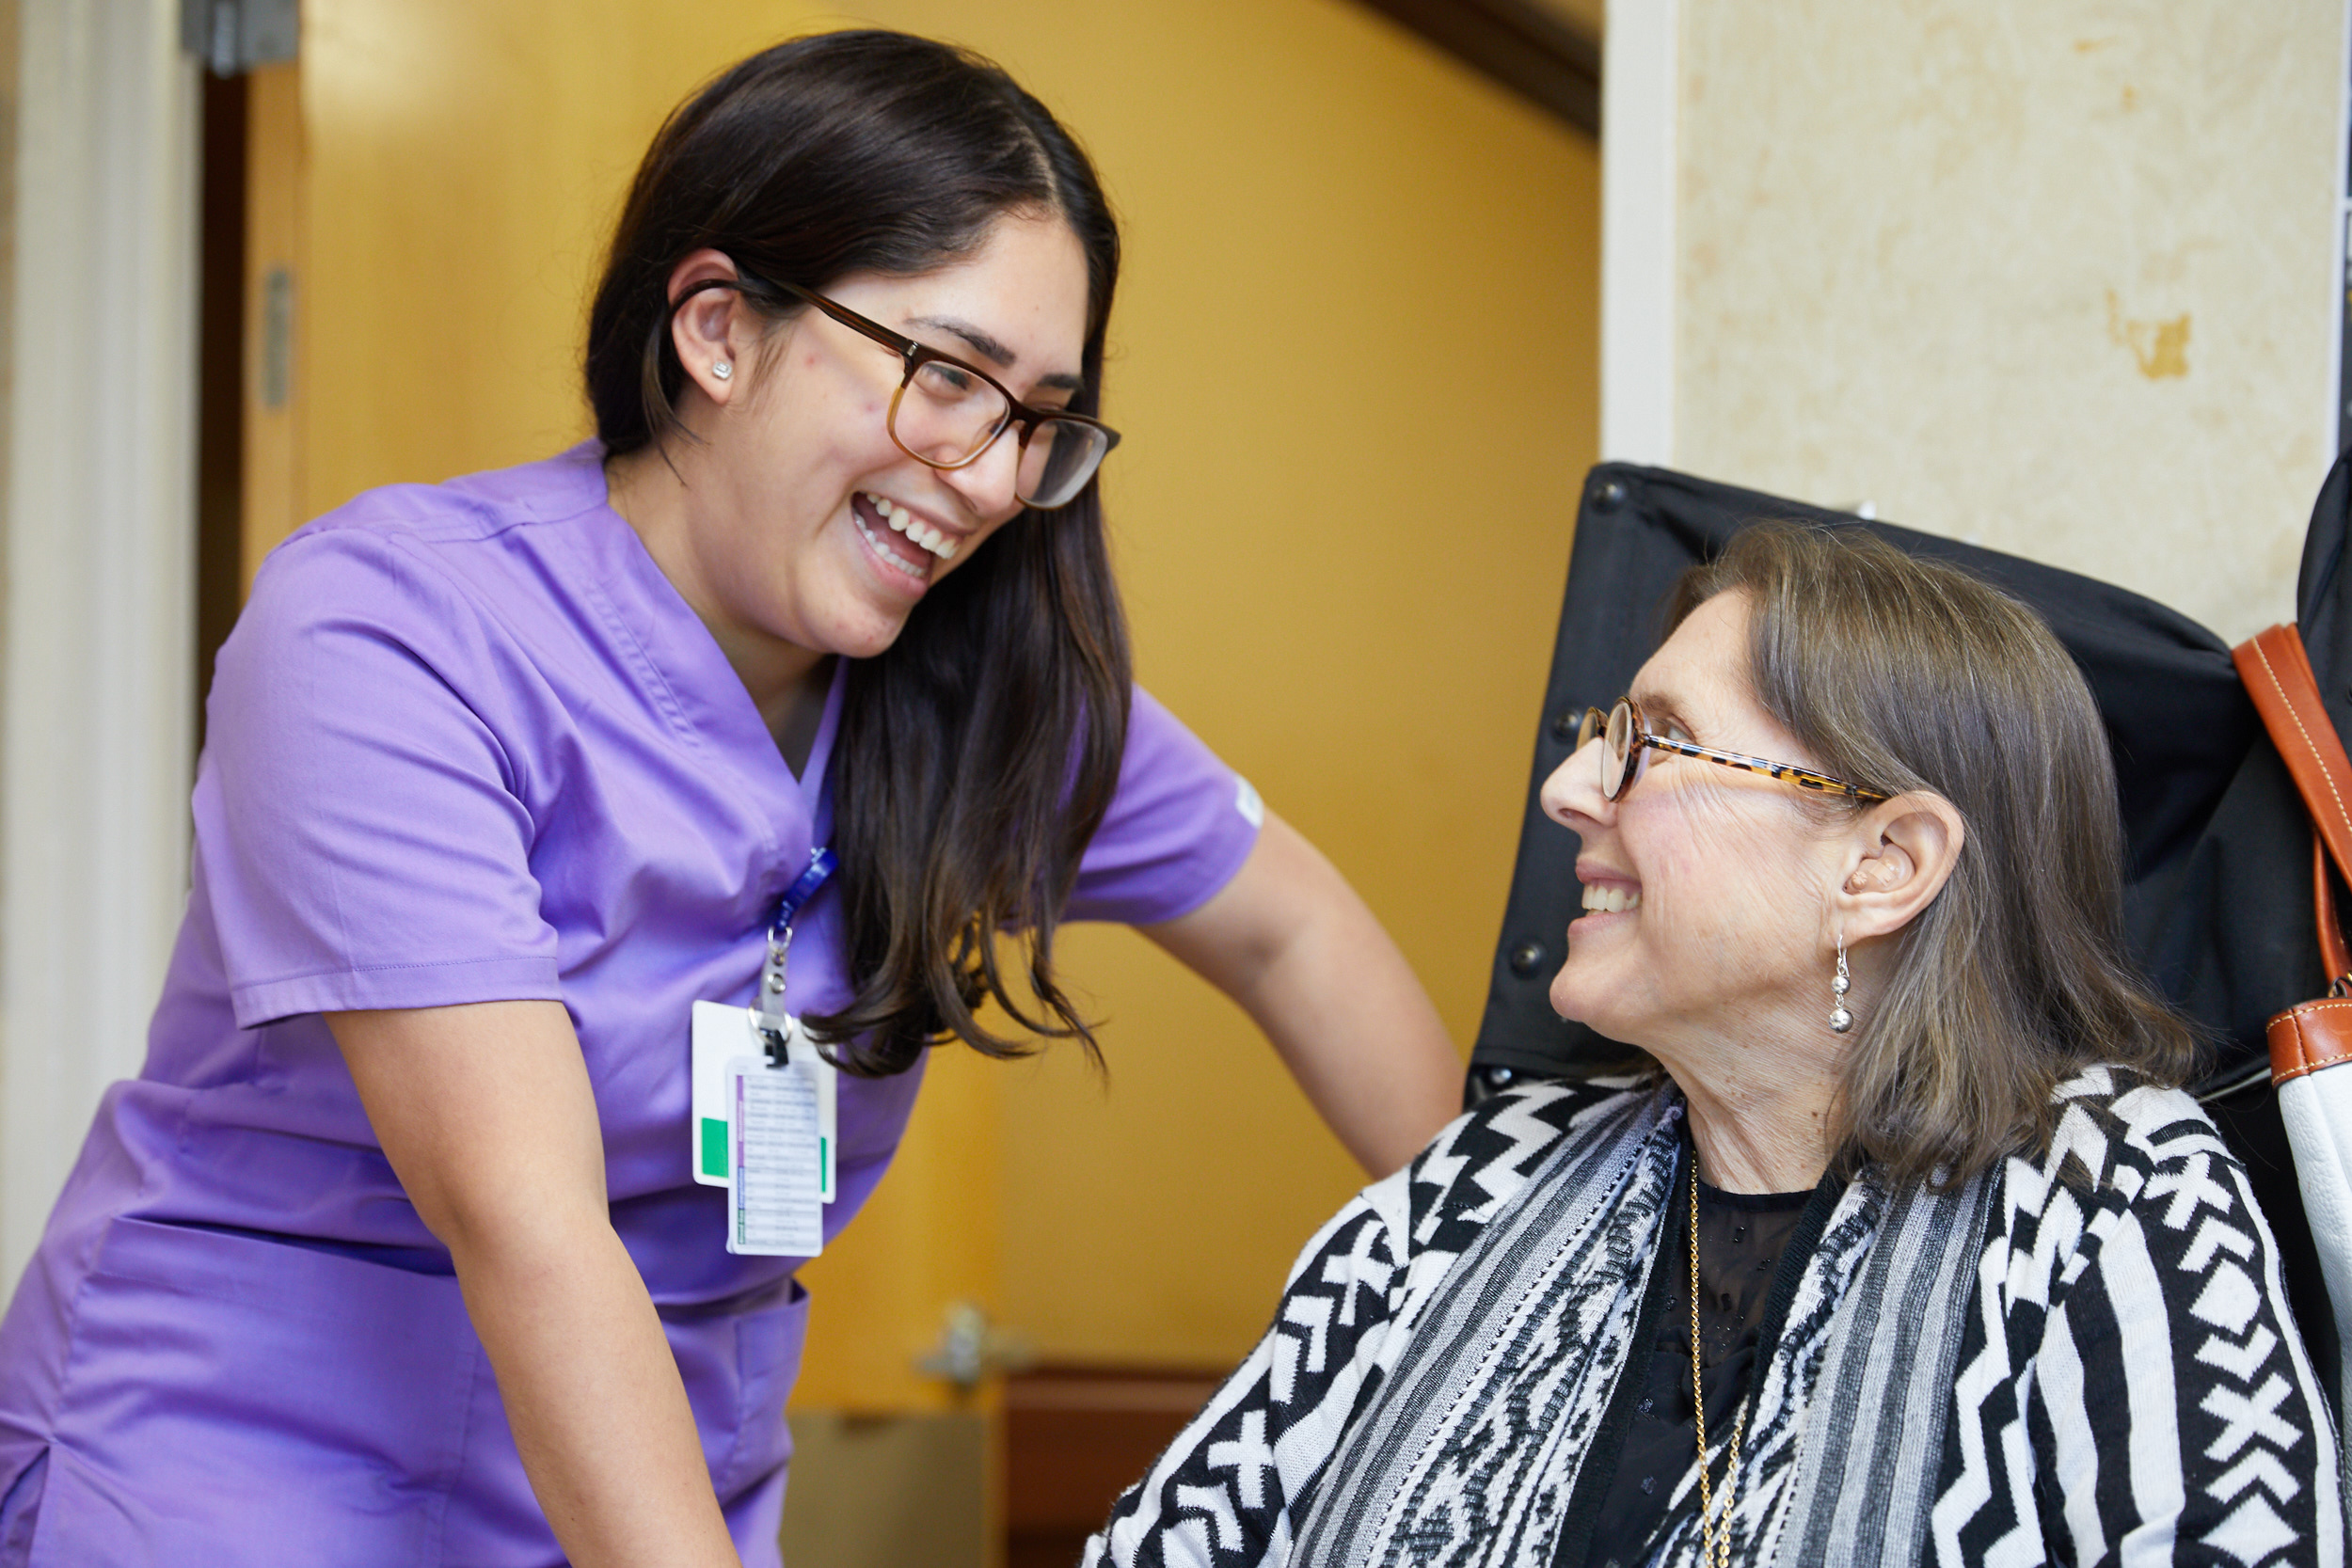 Smiling nurse chatting with senior woman as part of cardiac care to strengthen her weakened heart